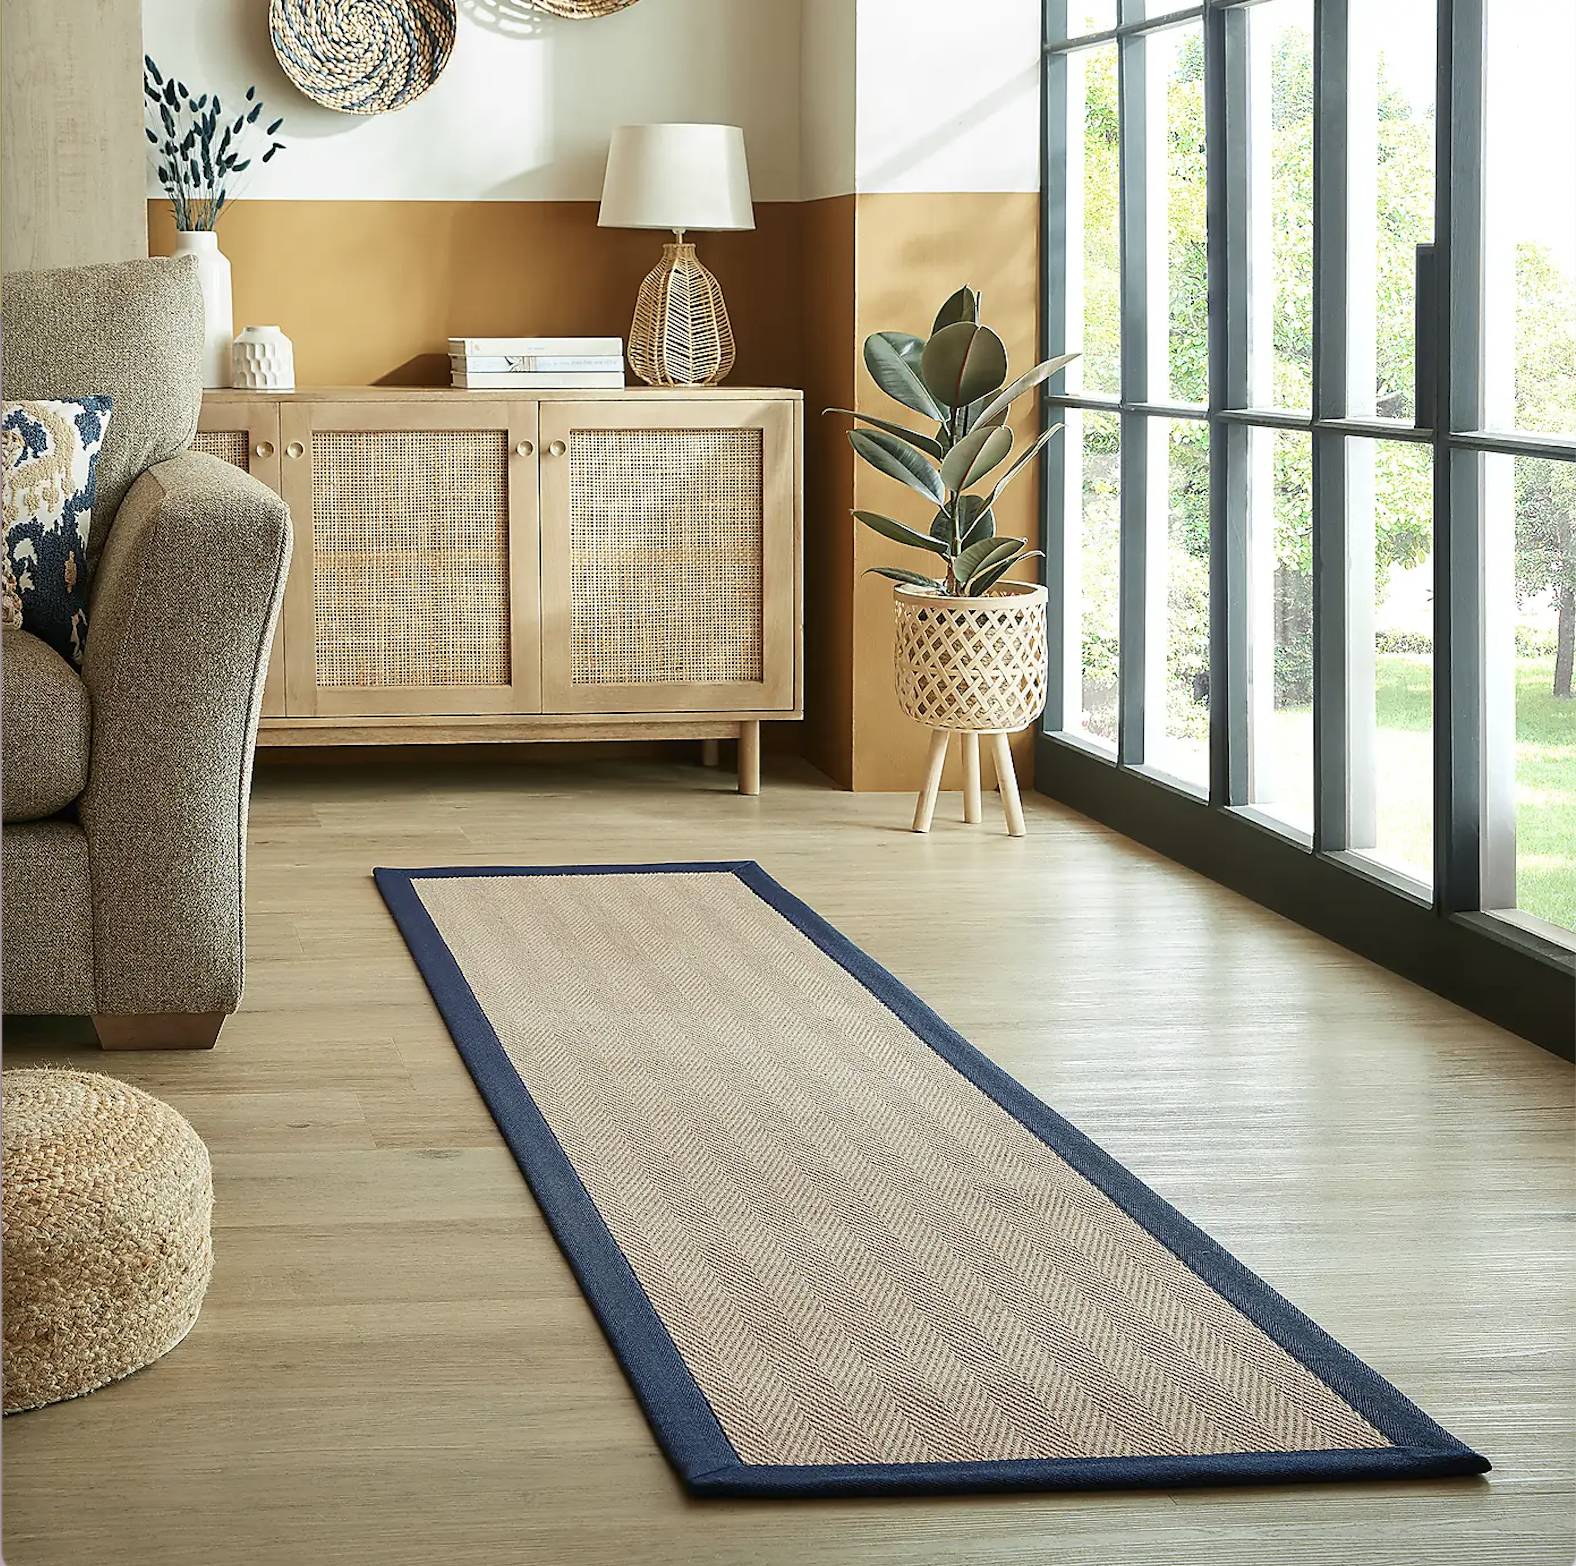 Best hall runners: stylish narrow rugs for a snug space - Your Home Style